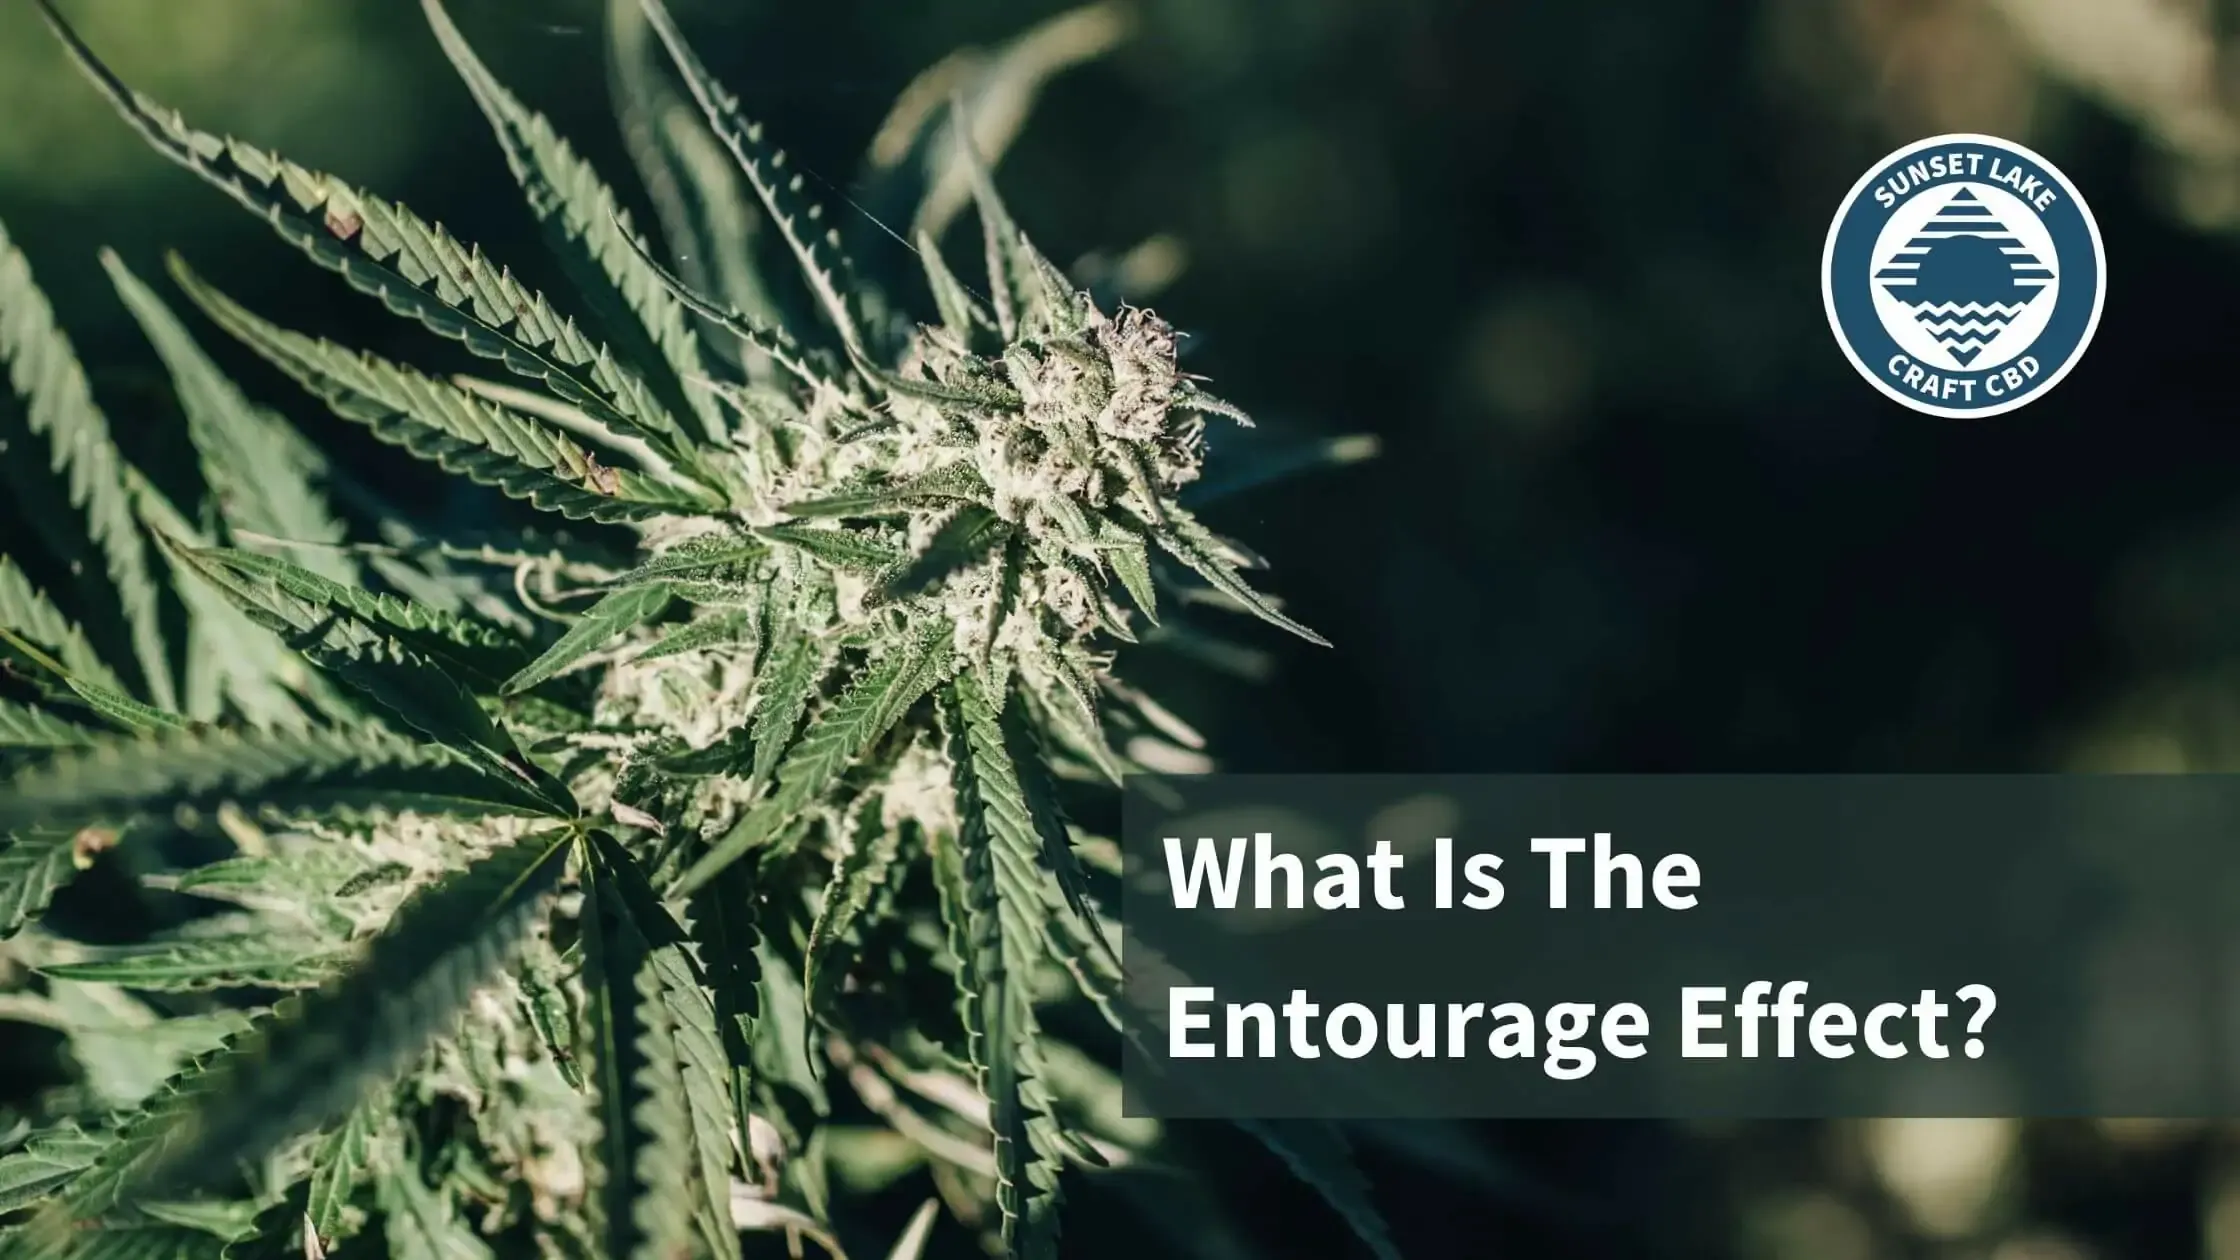 A flowering hemp cola with text that reads "What Is The Entourage Effect?"